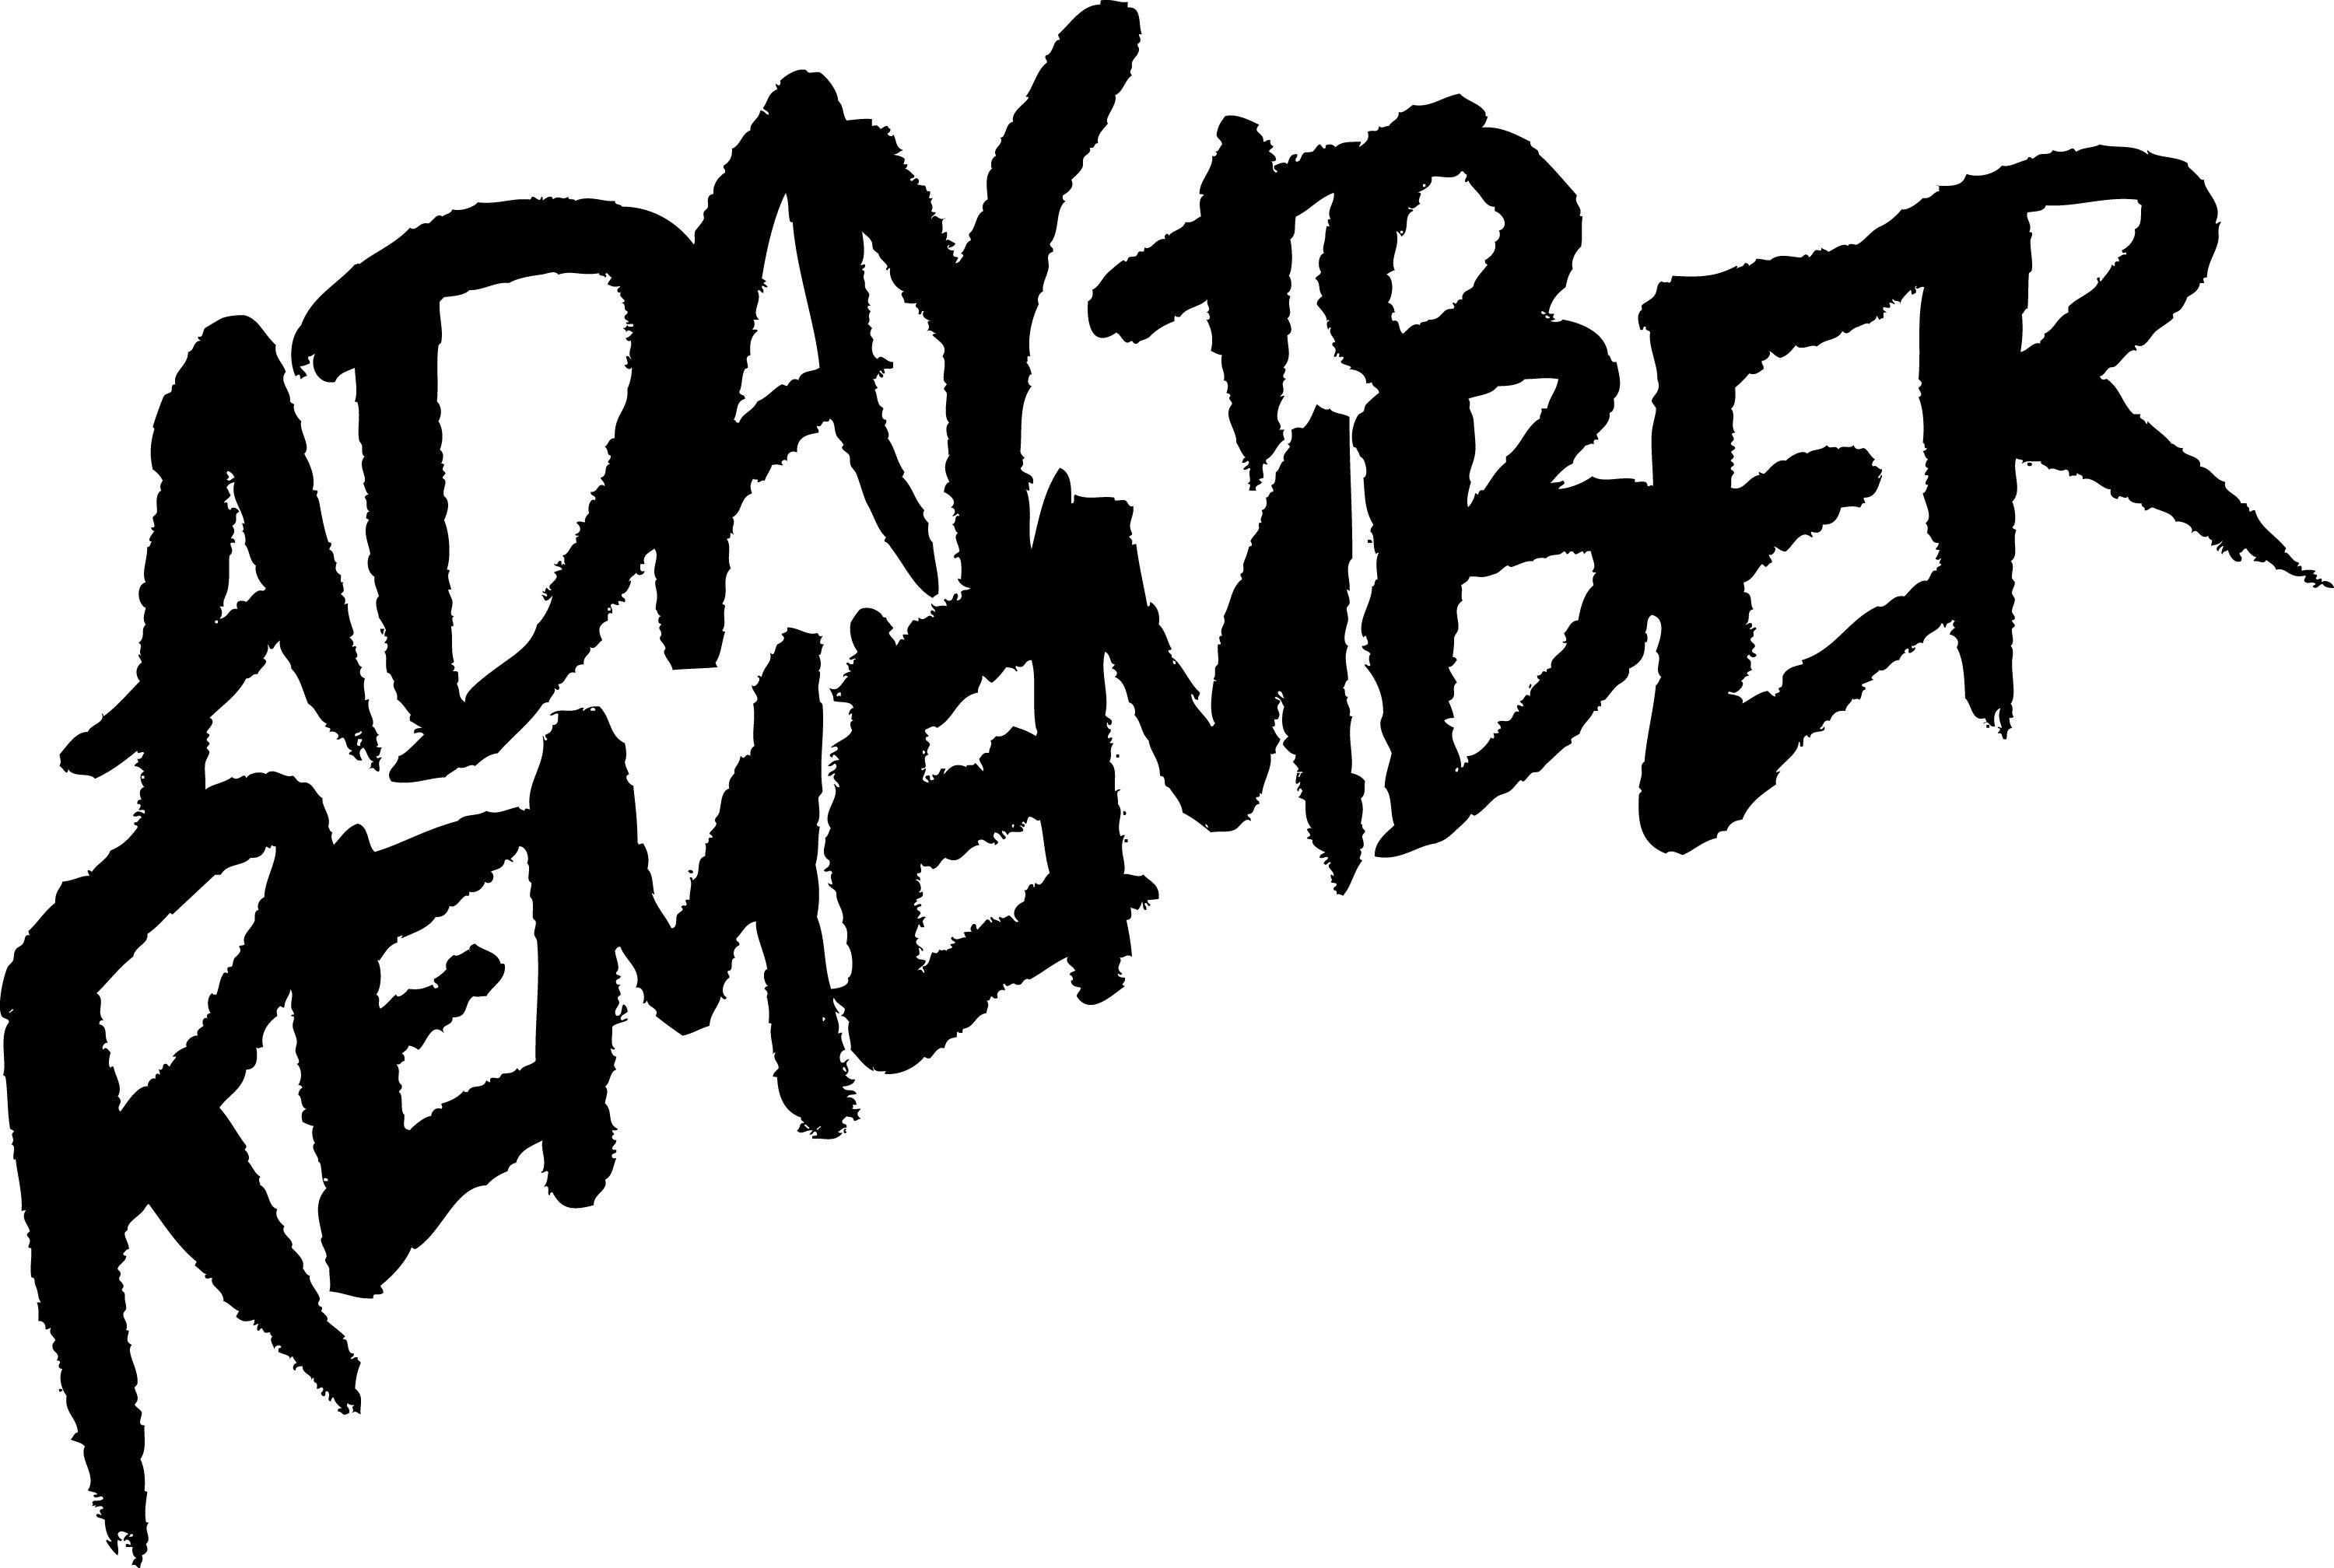 A Day to Remember Logo - A Day To Remember - Victory Press Center